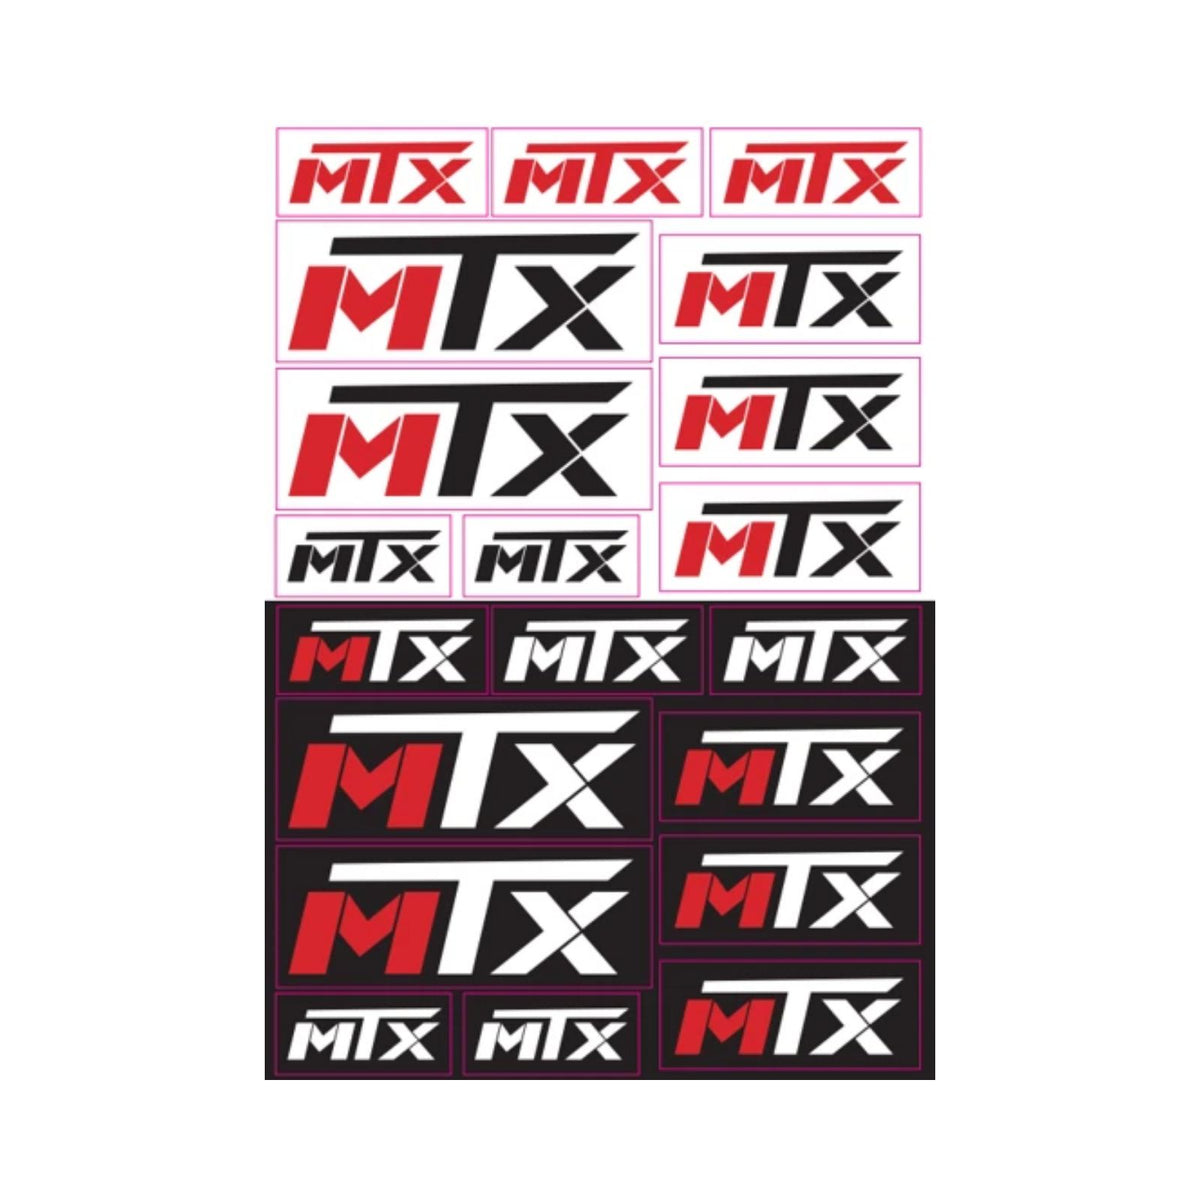 Sticker with different logo